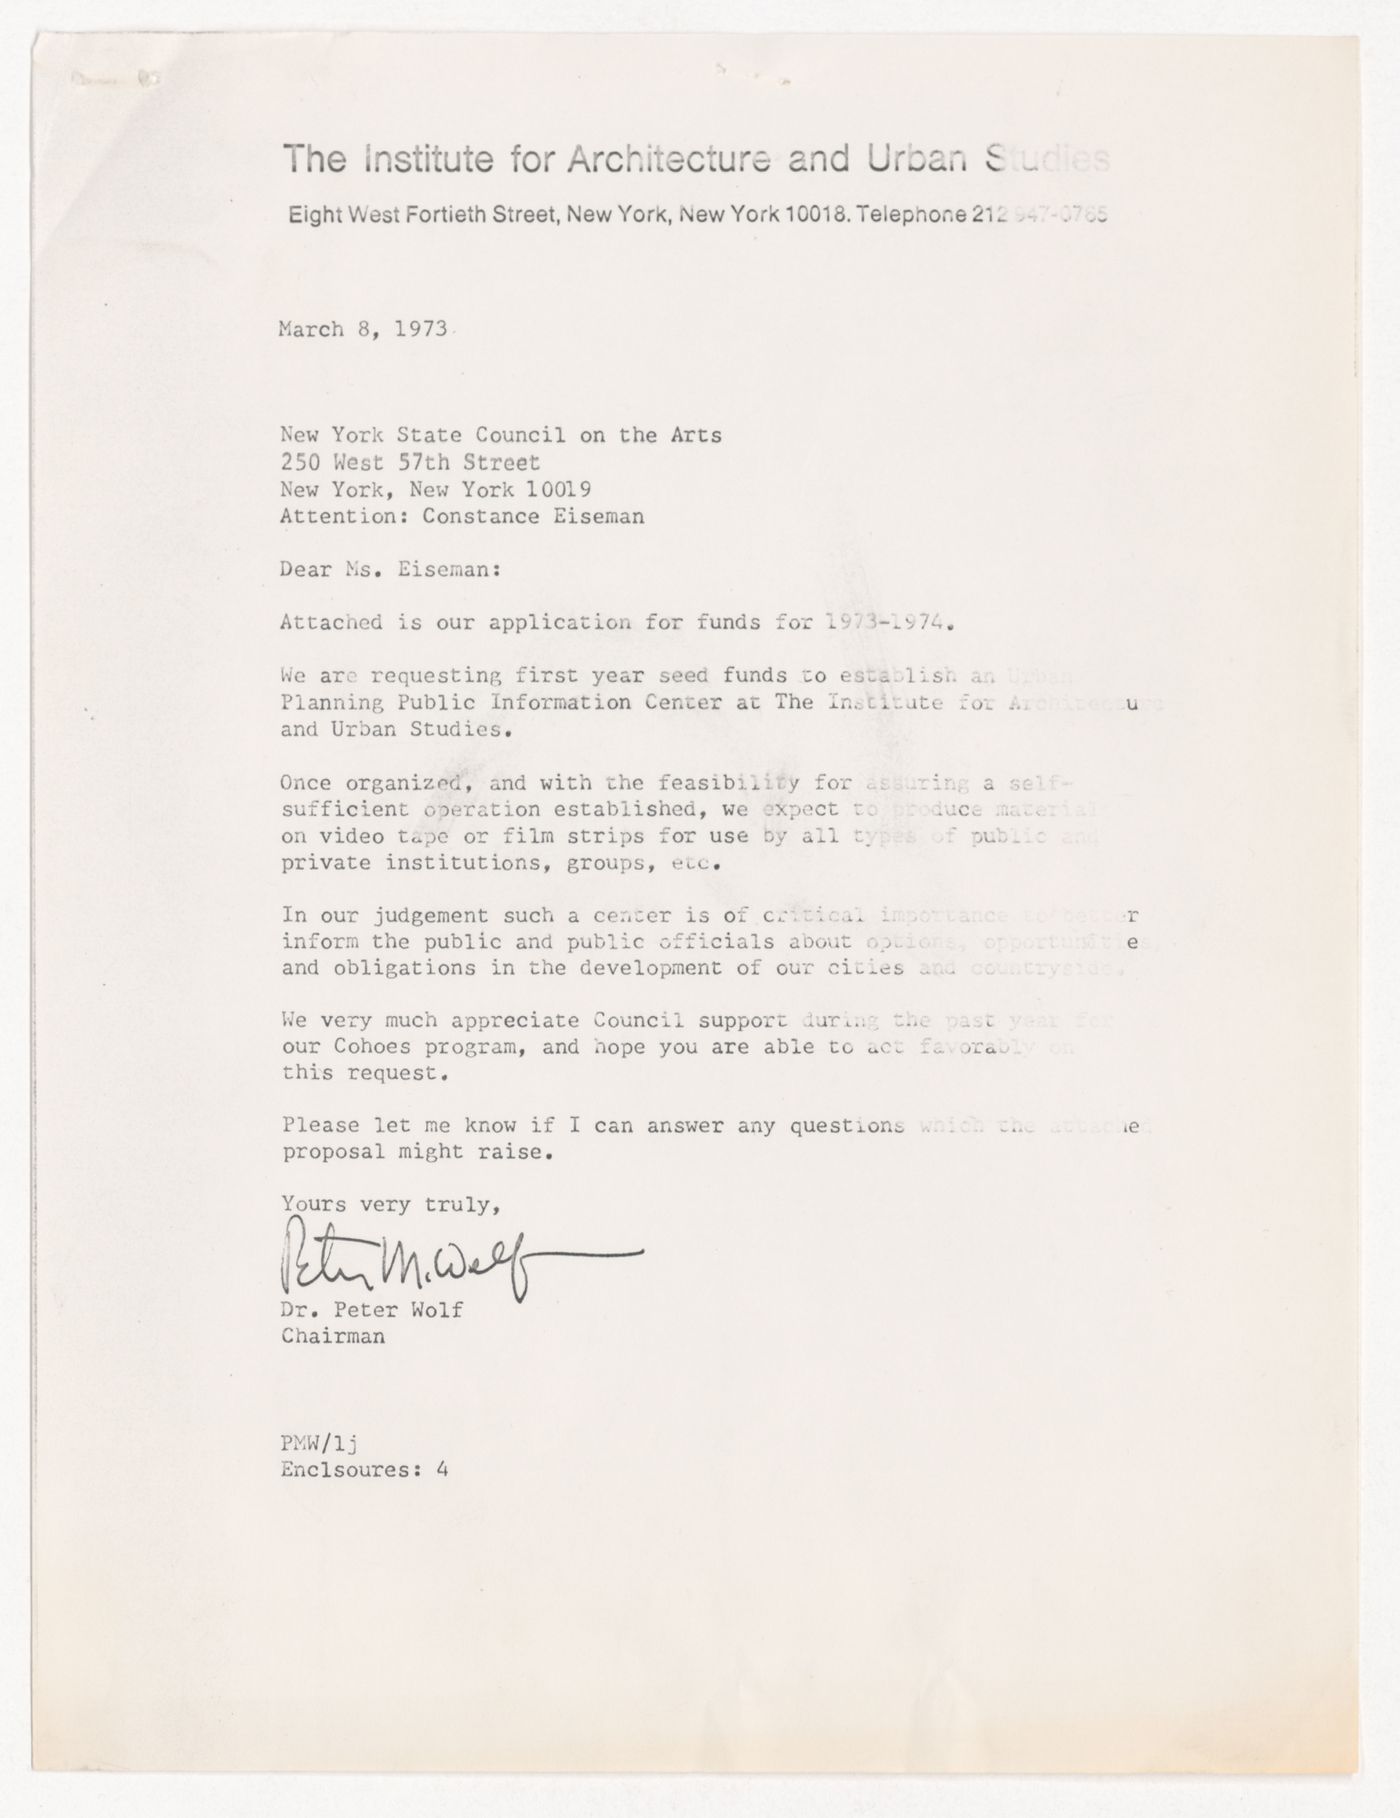 Letter from Peter Wolf to Constance Eiseman with attached application for funds from the New York State Council on the Arts (NYSCA) for 1973-1974